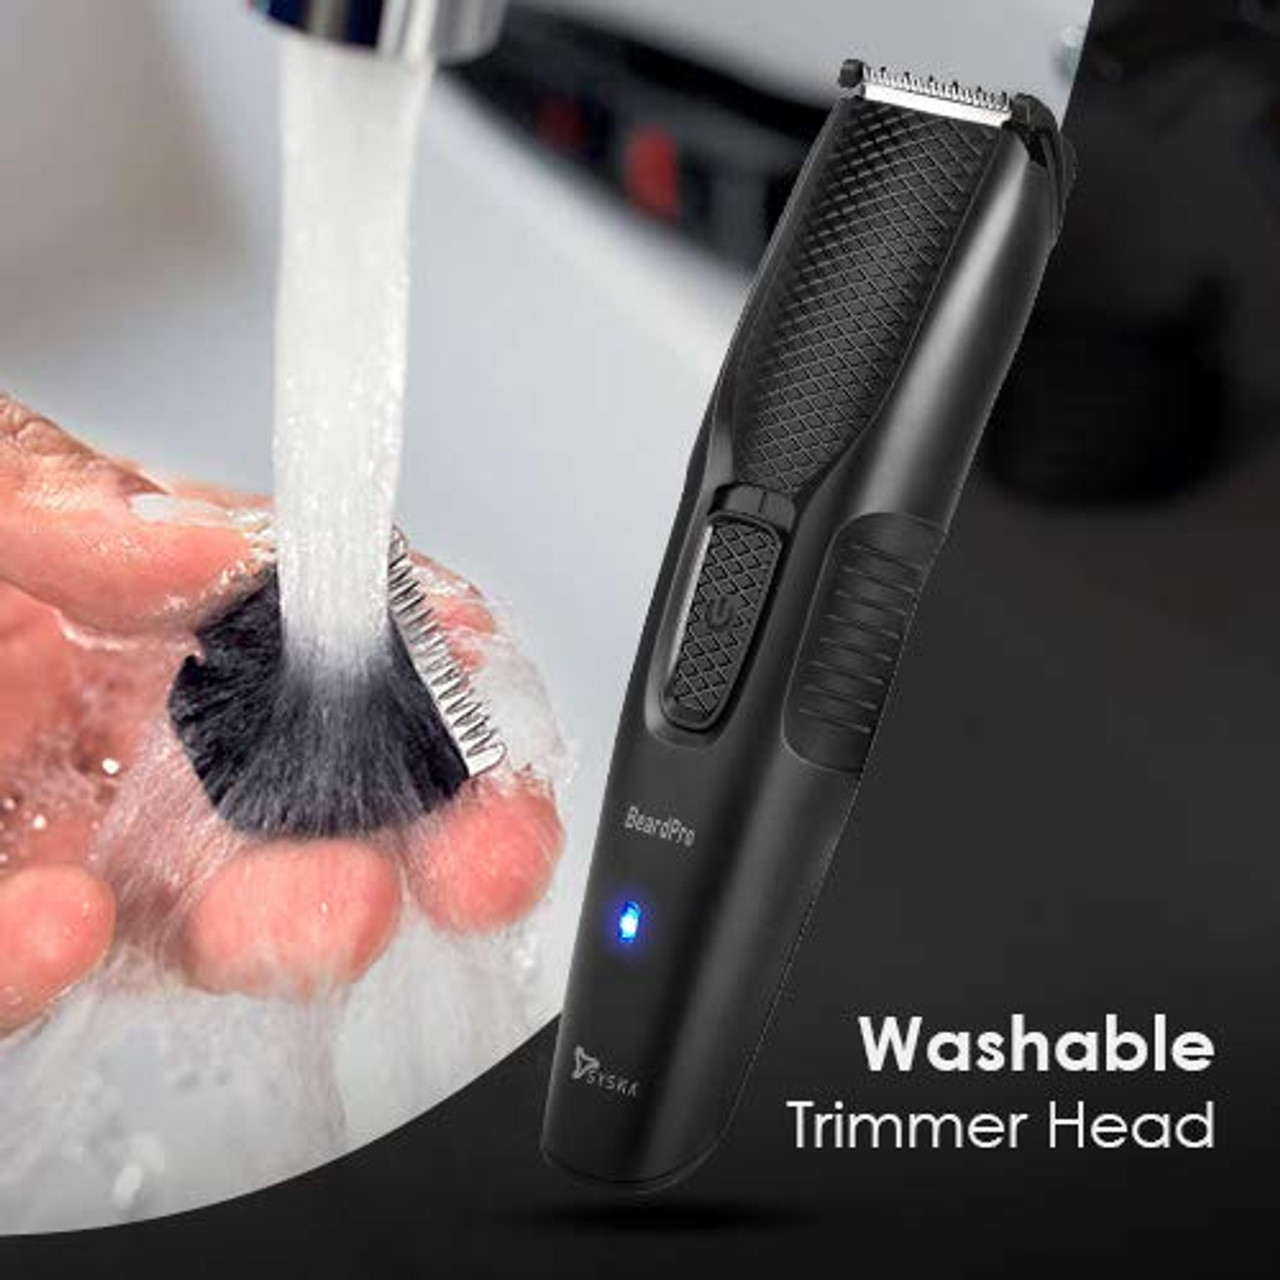 syska hair trimmers and shavers